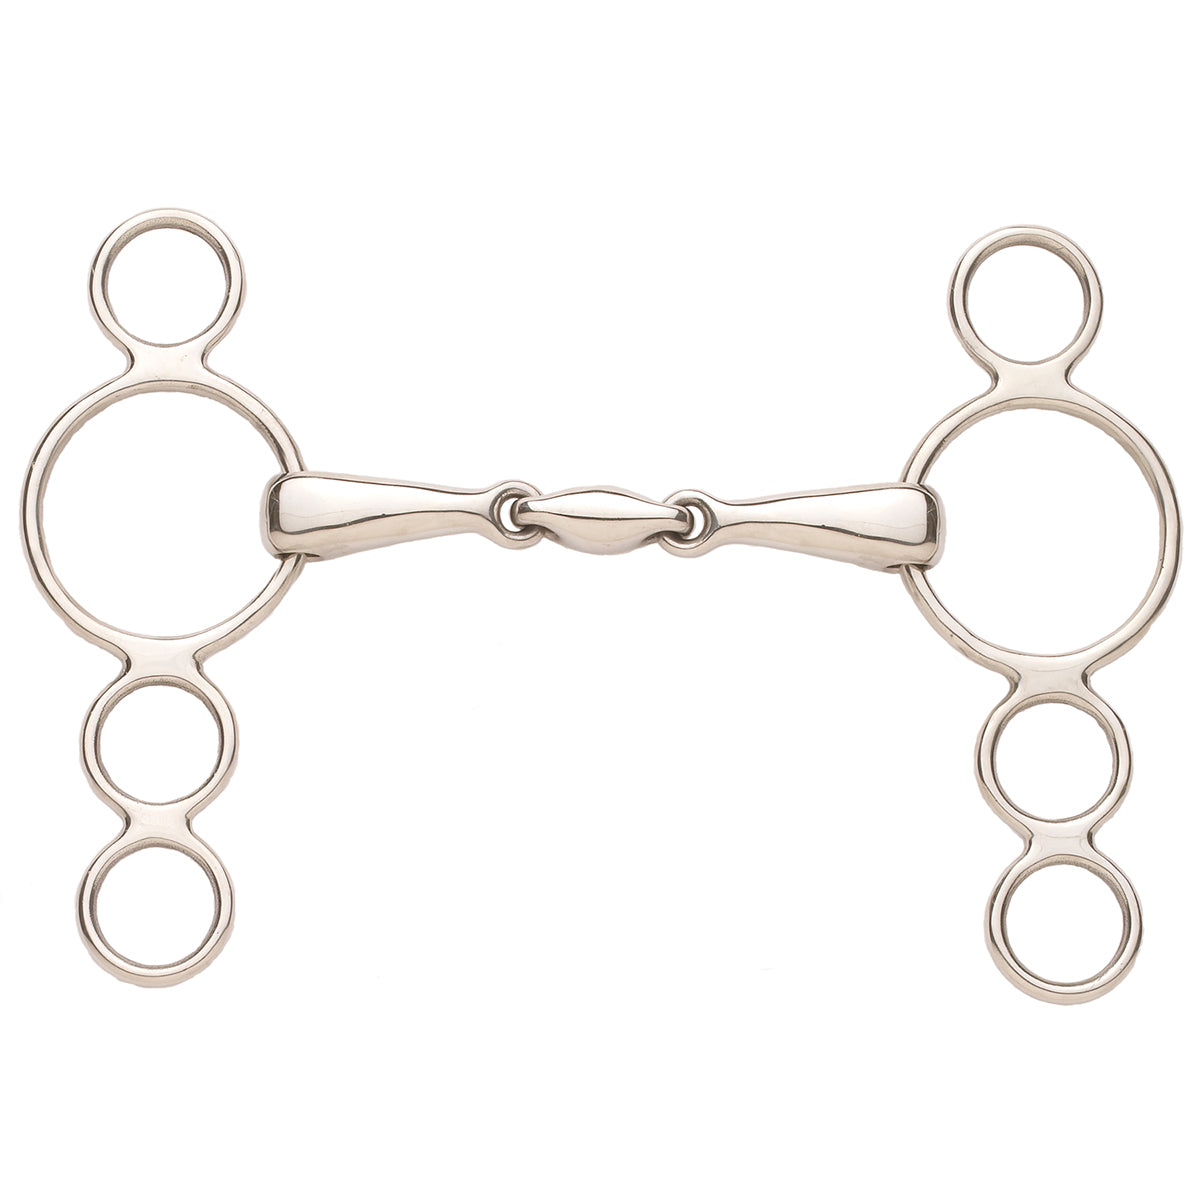 Ovation Elite Solid Stainless Steel 3-Ring Gag